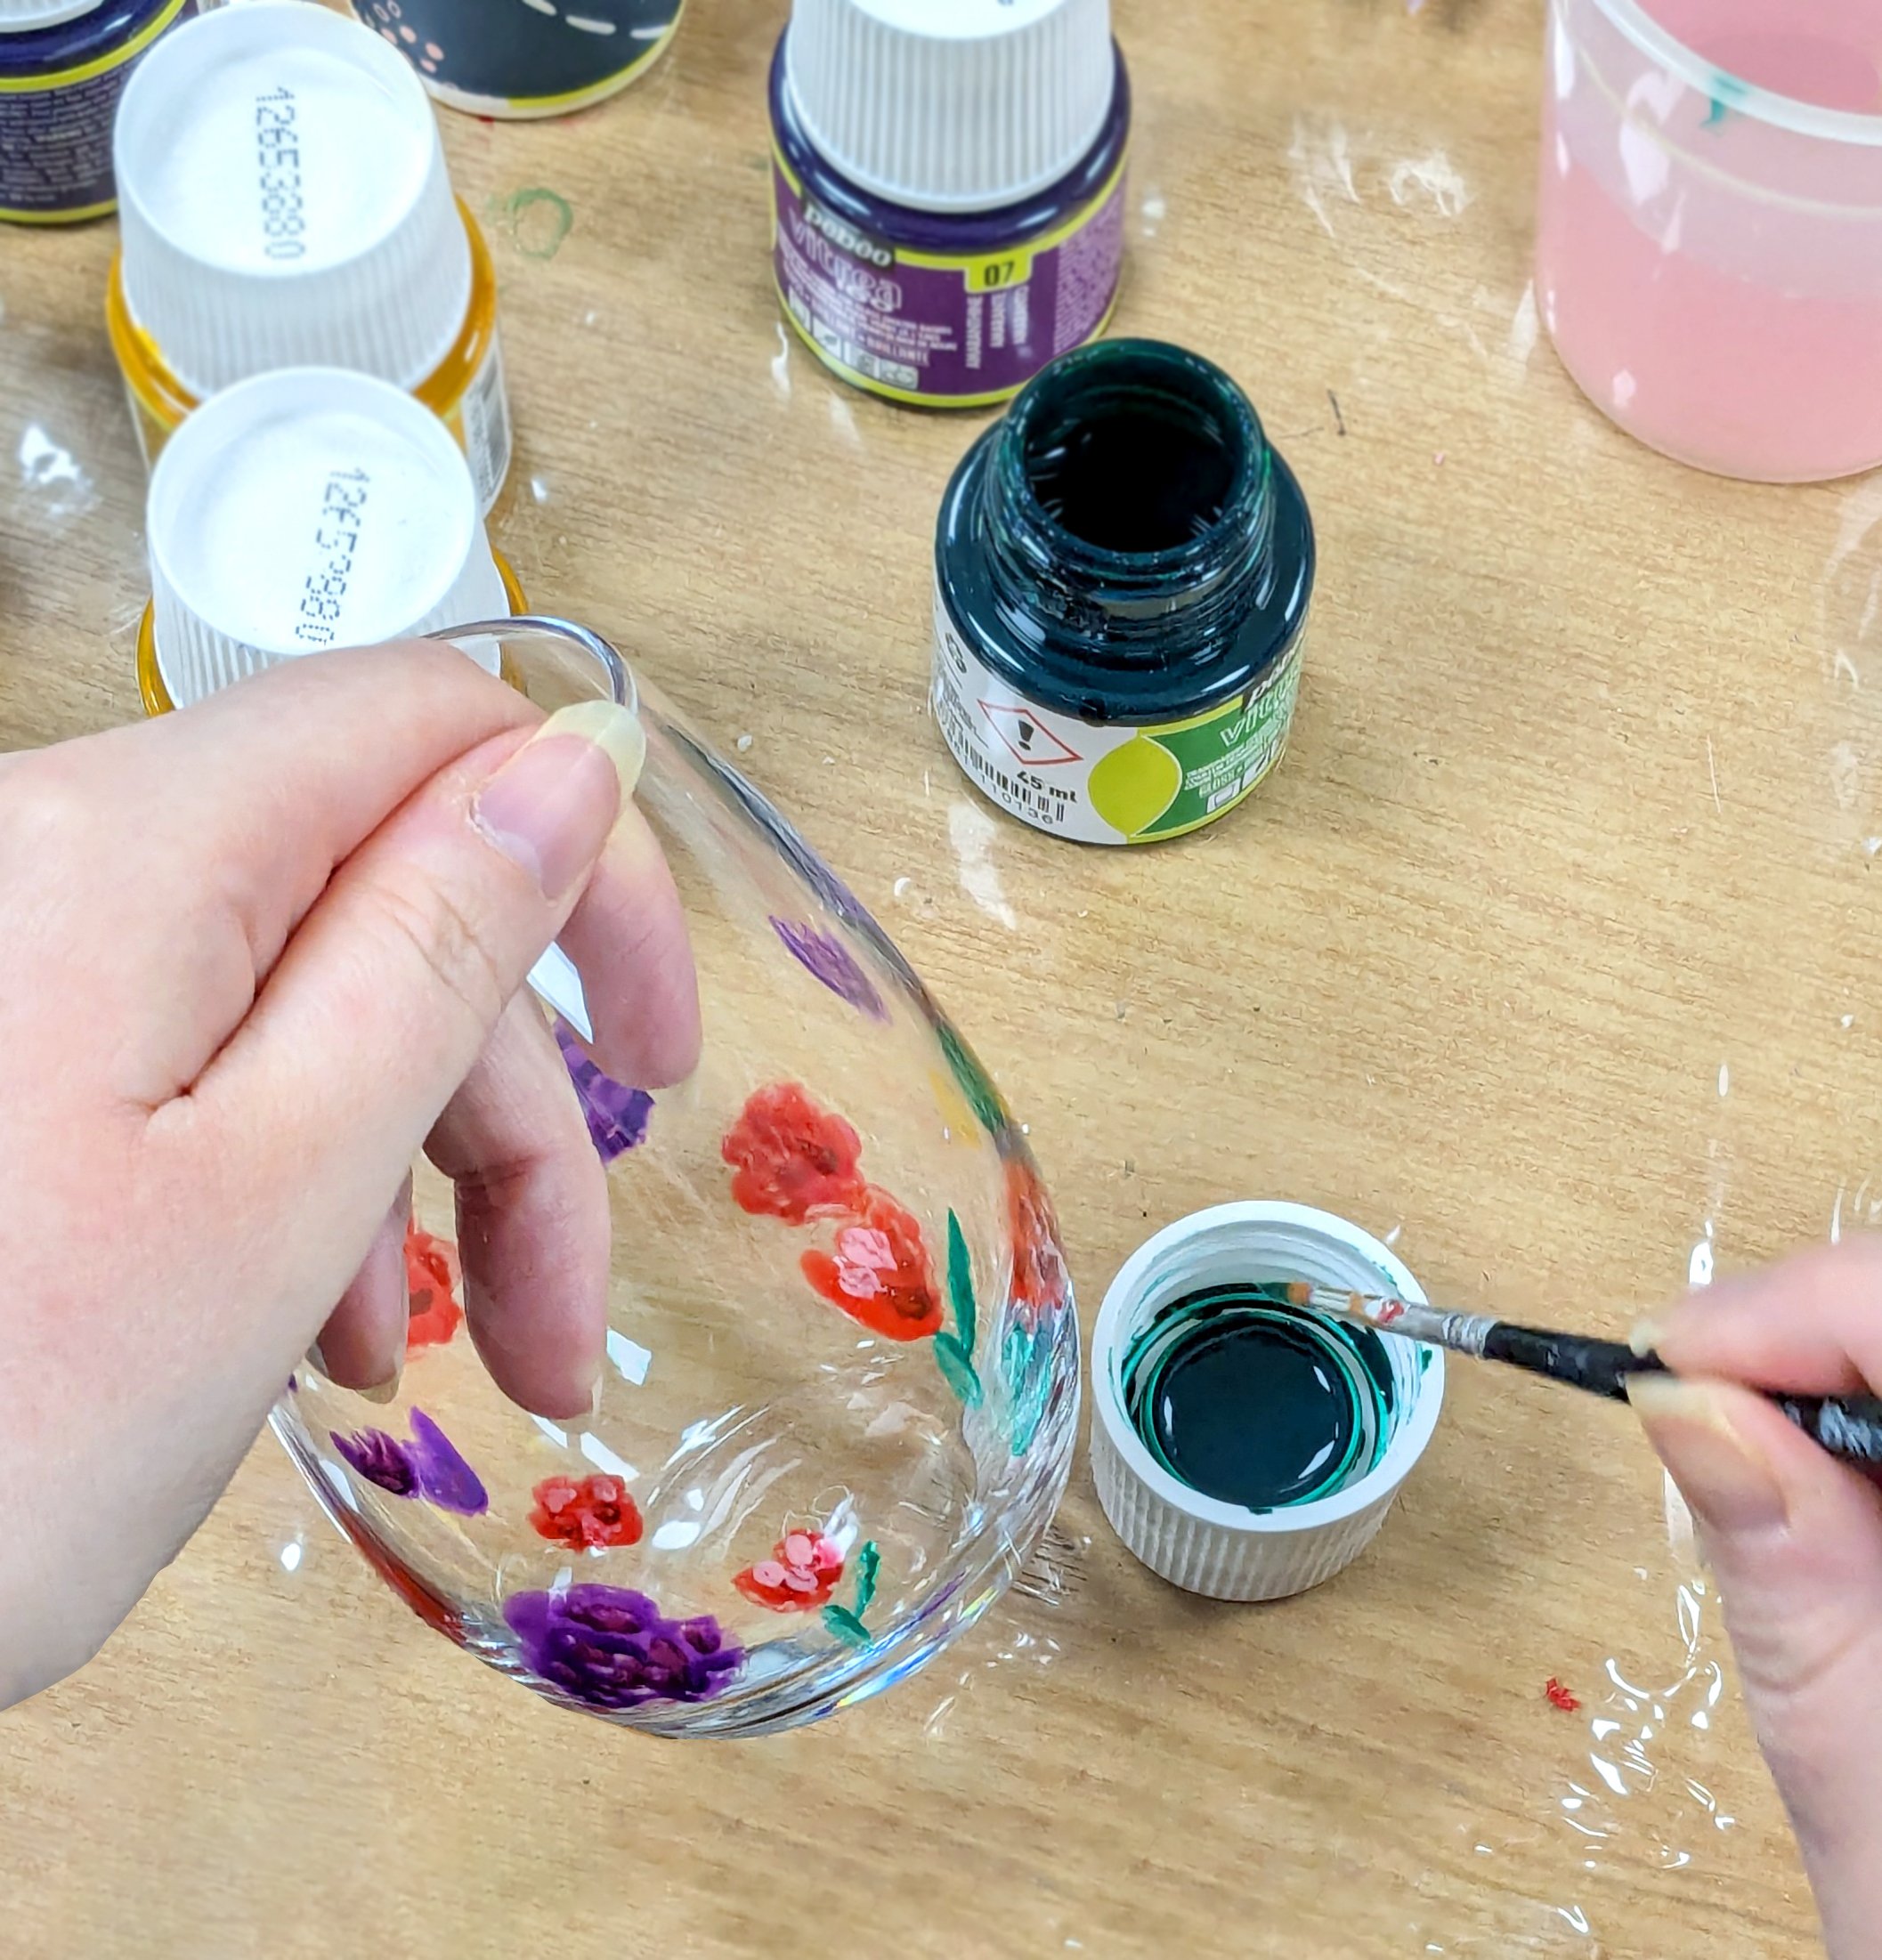 Arty Glass Painting Activity Team Building London The Crafty Hen.jpg